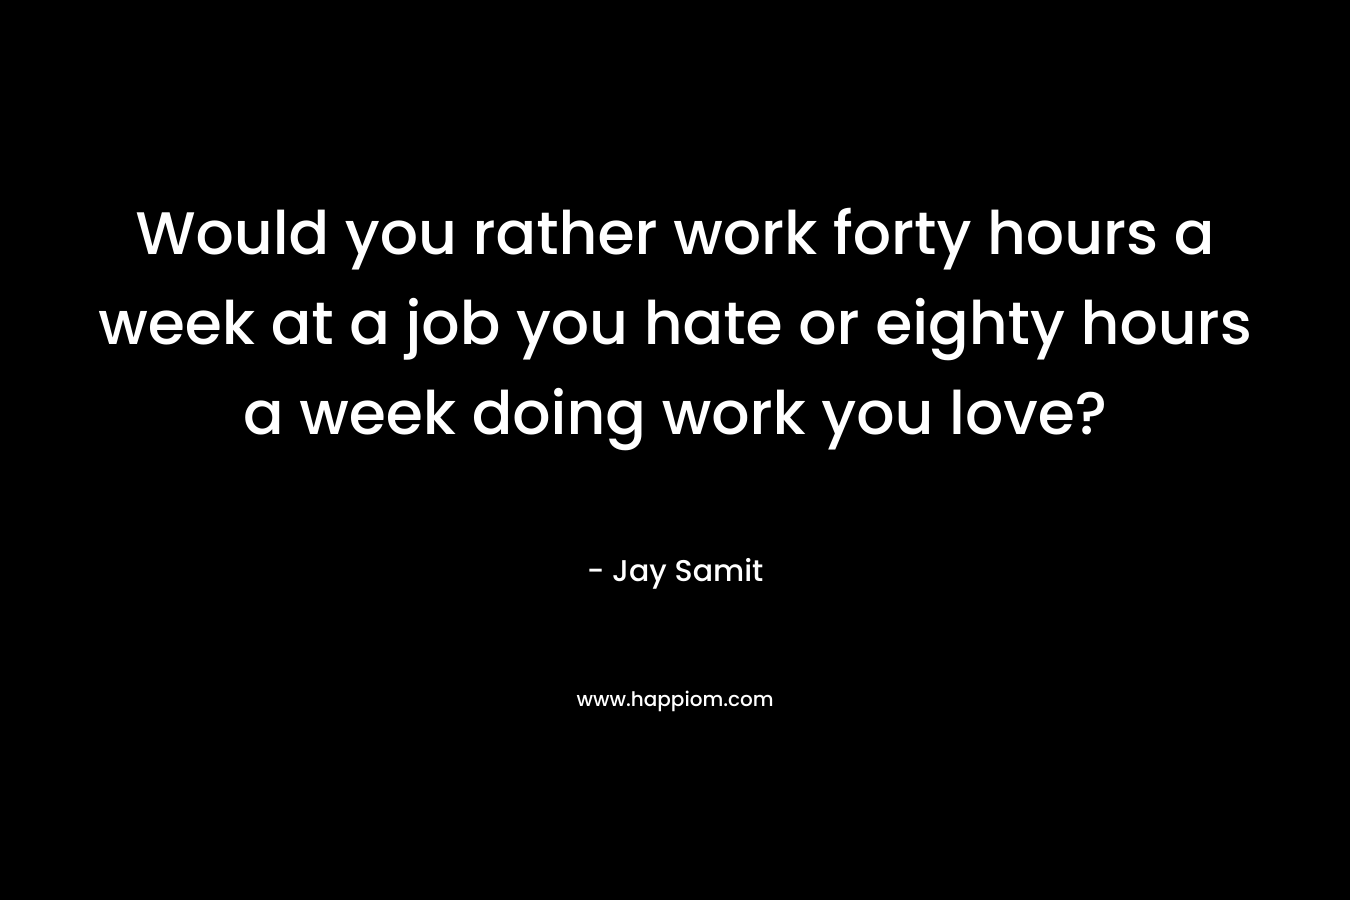 Would you rather work forty hours a week at a job you hate or eighty hours a week doing work you love?